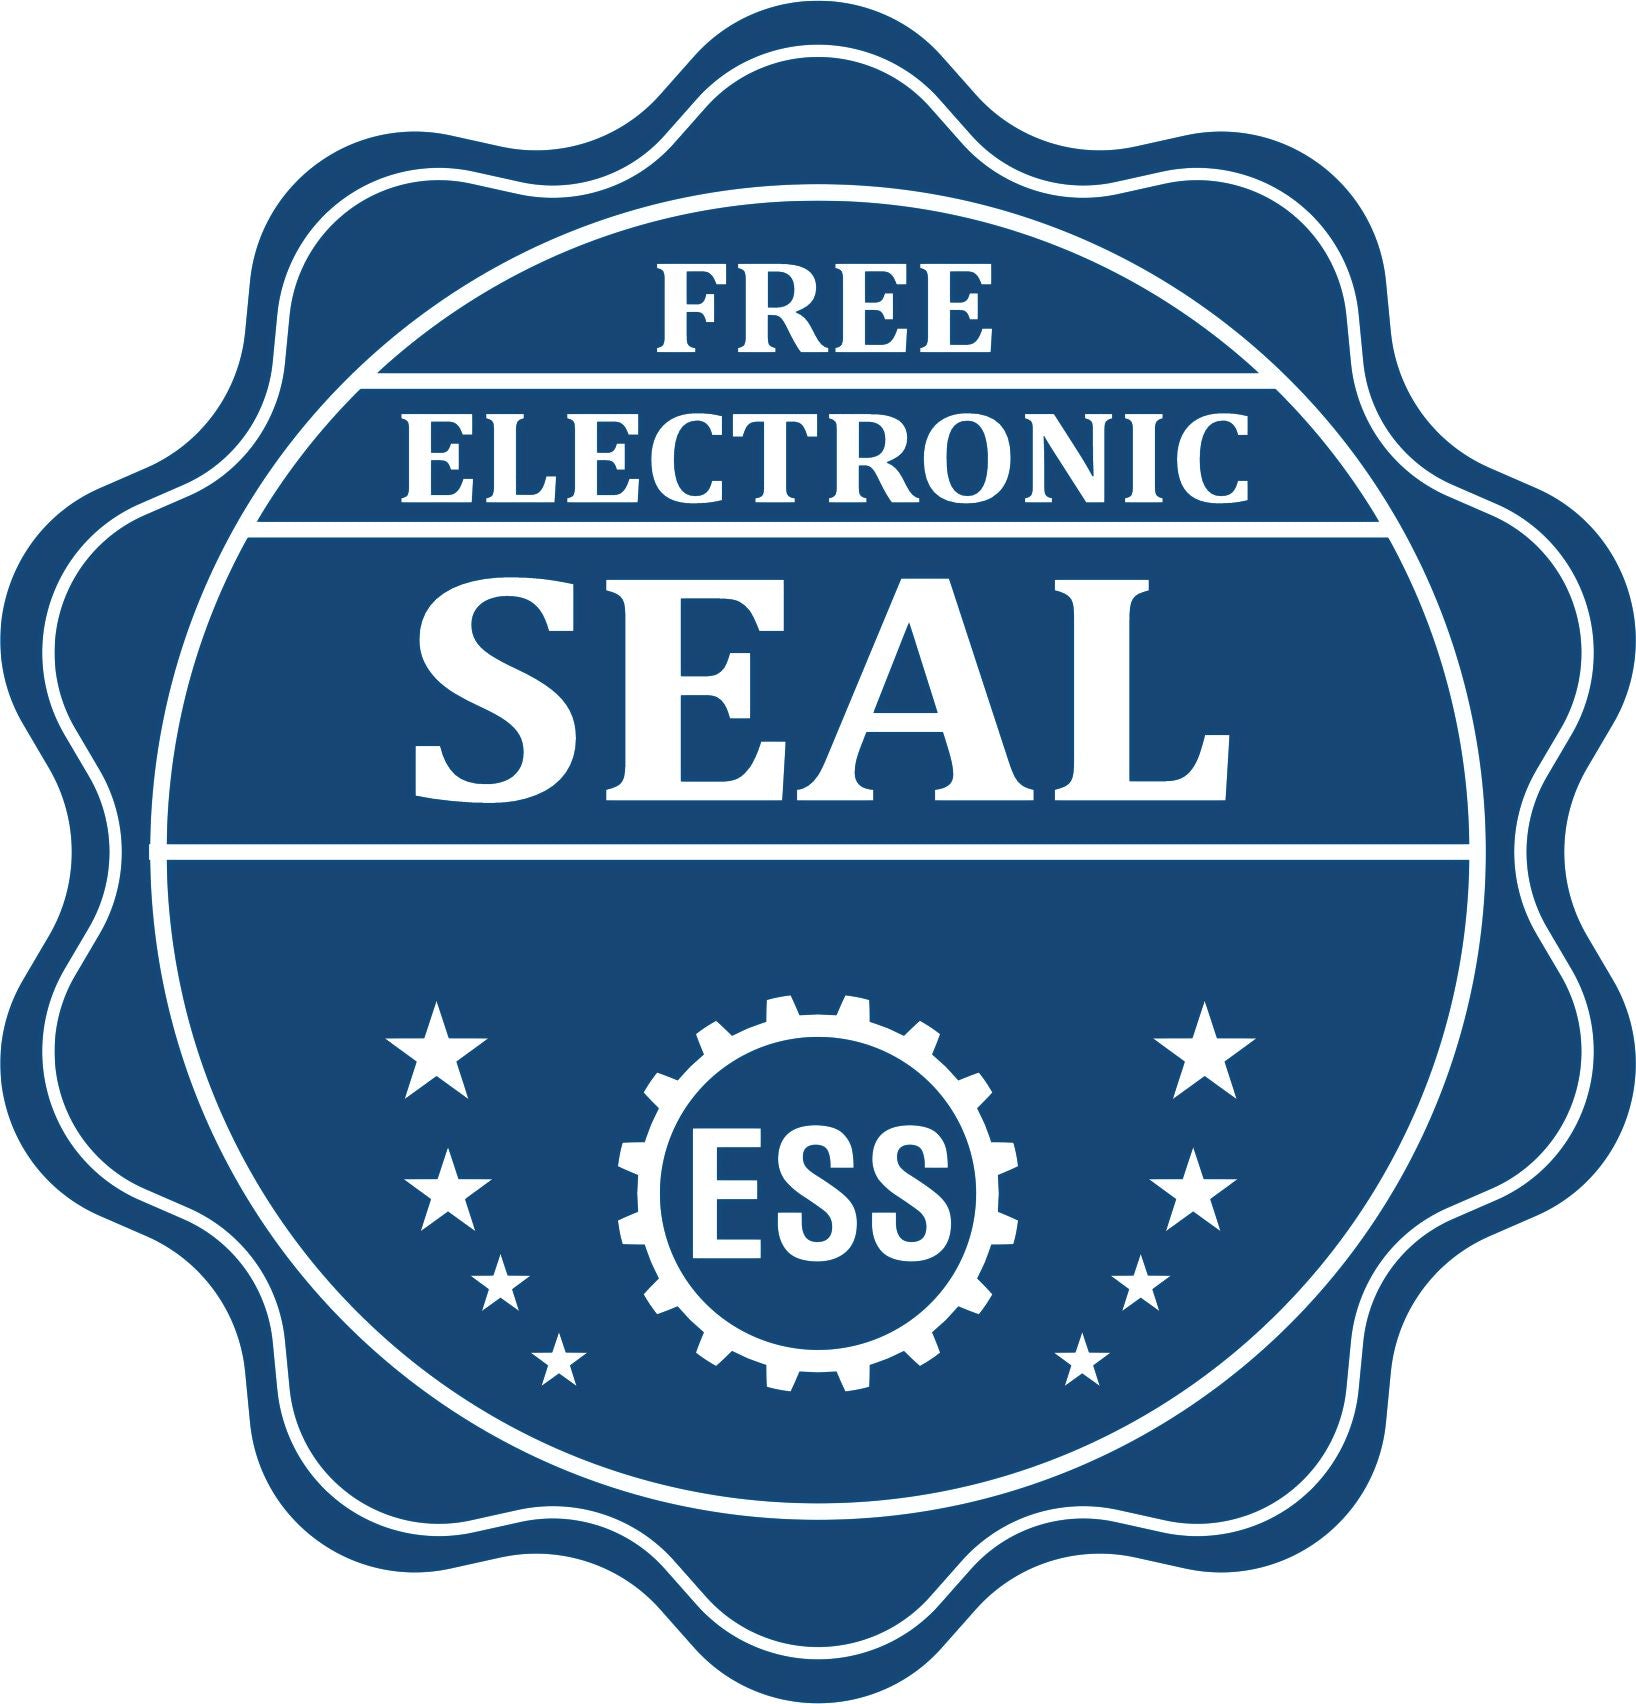 A badge showing a free electronic seal for the Heavy Duty Cast Iron Washington Engineer Seal Embosser with stars and the ESS gear on the emblem.